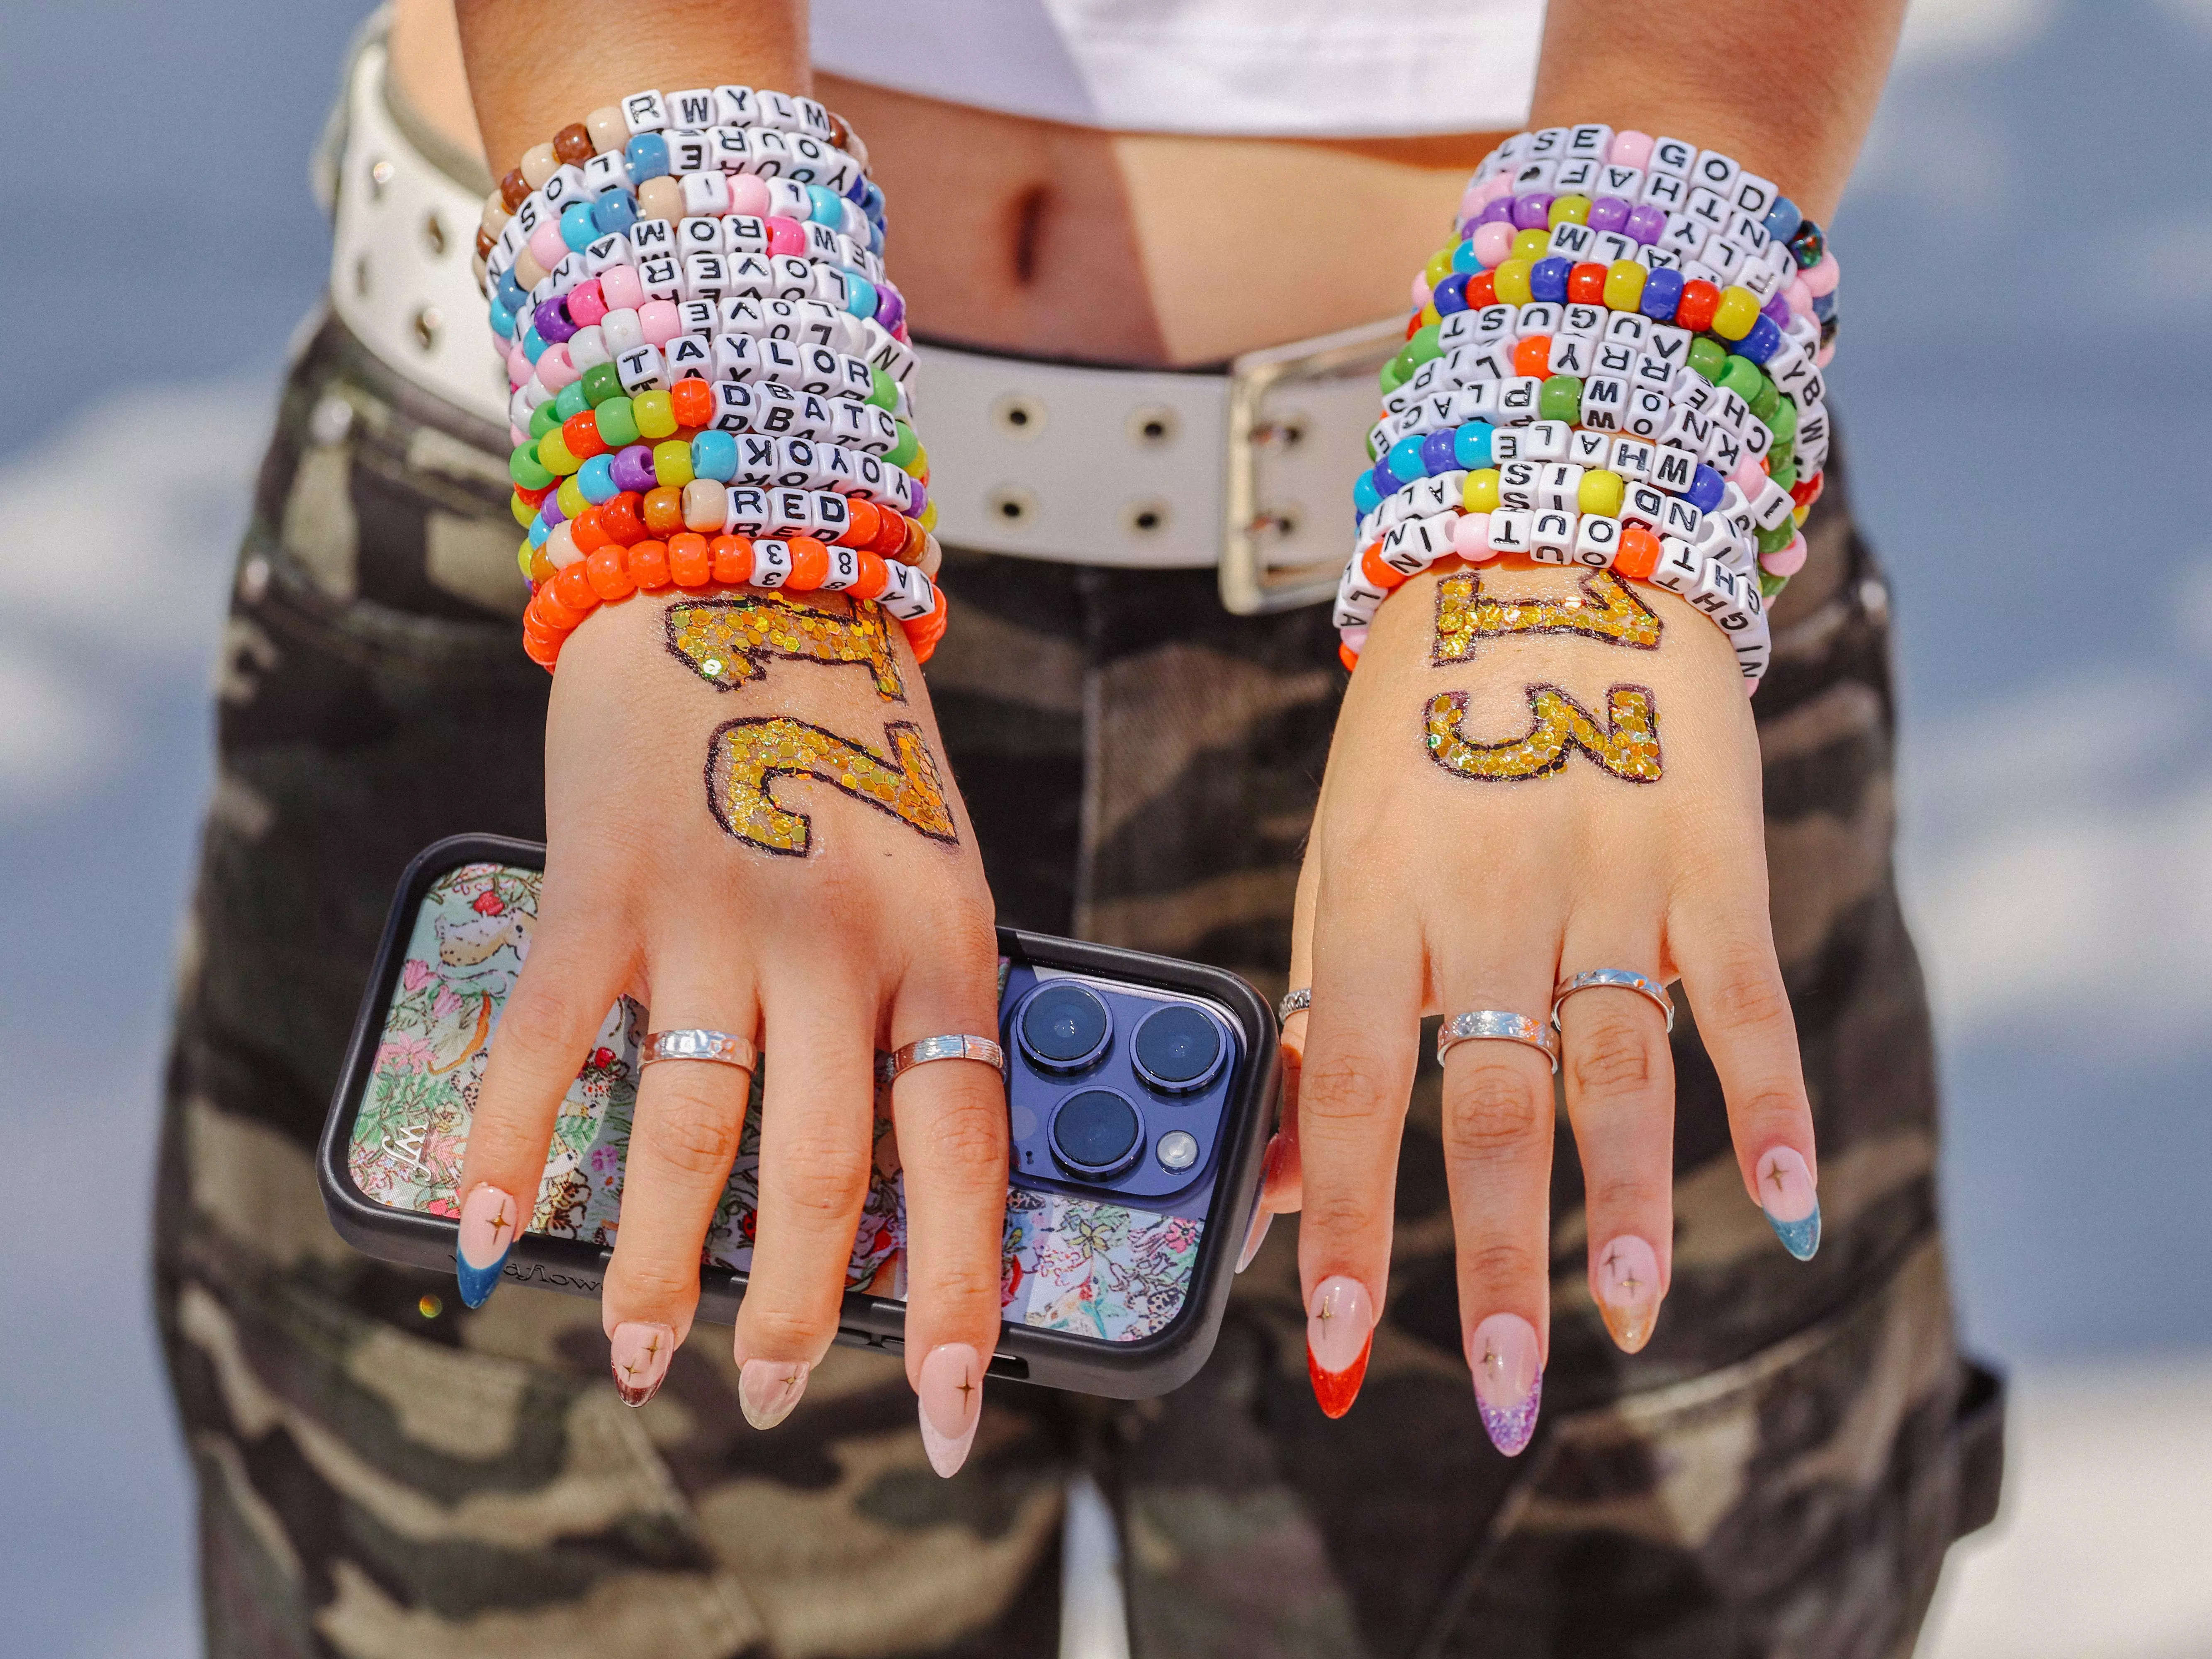 A woman says she's made $16,000 selling friendship bracelets thanks to ...